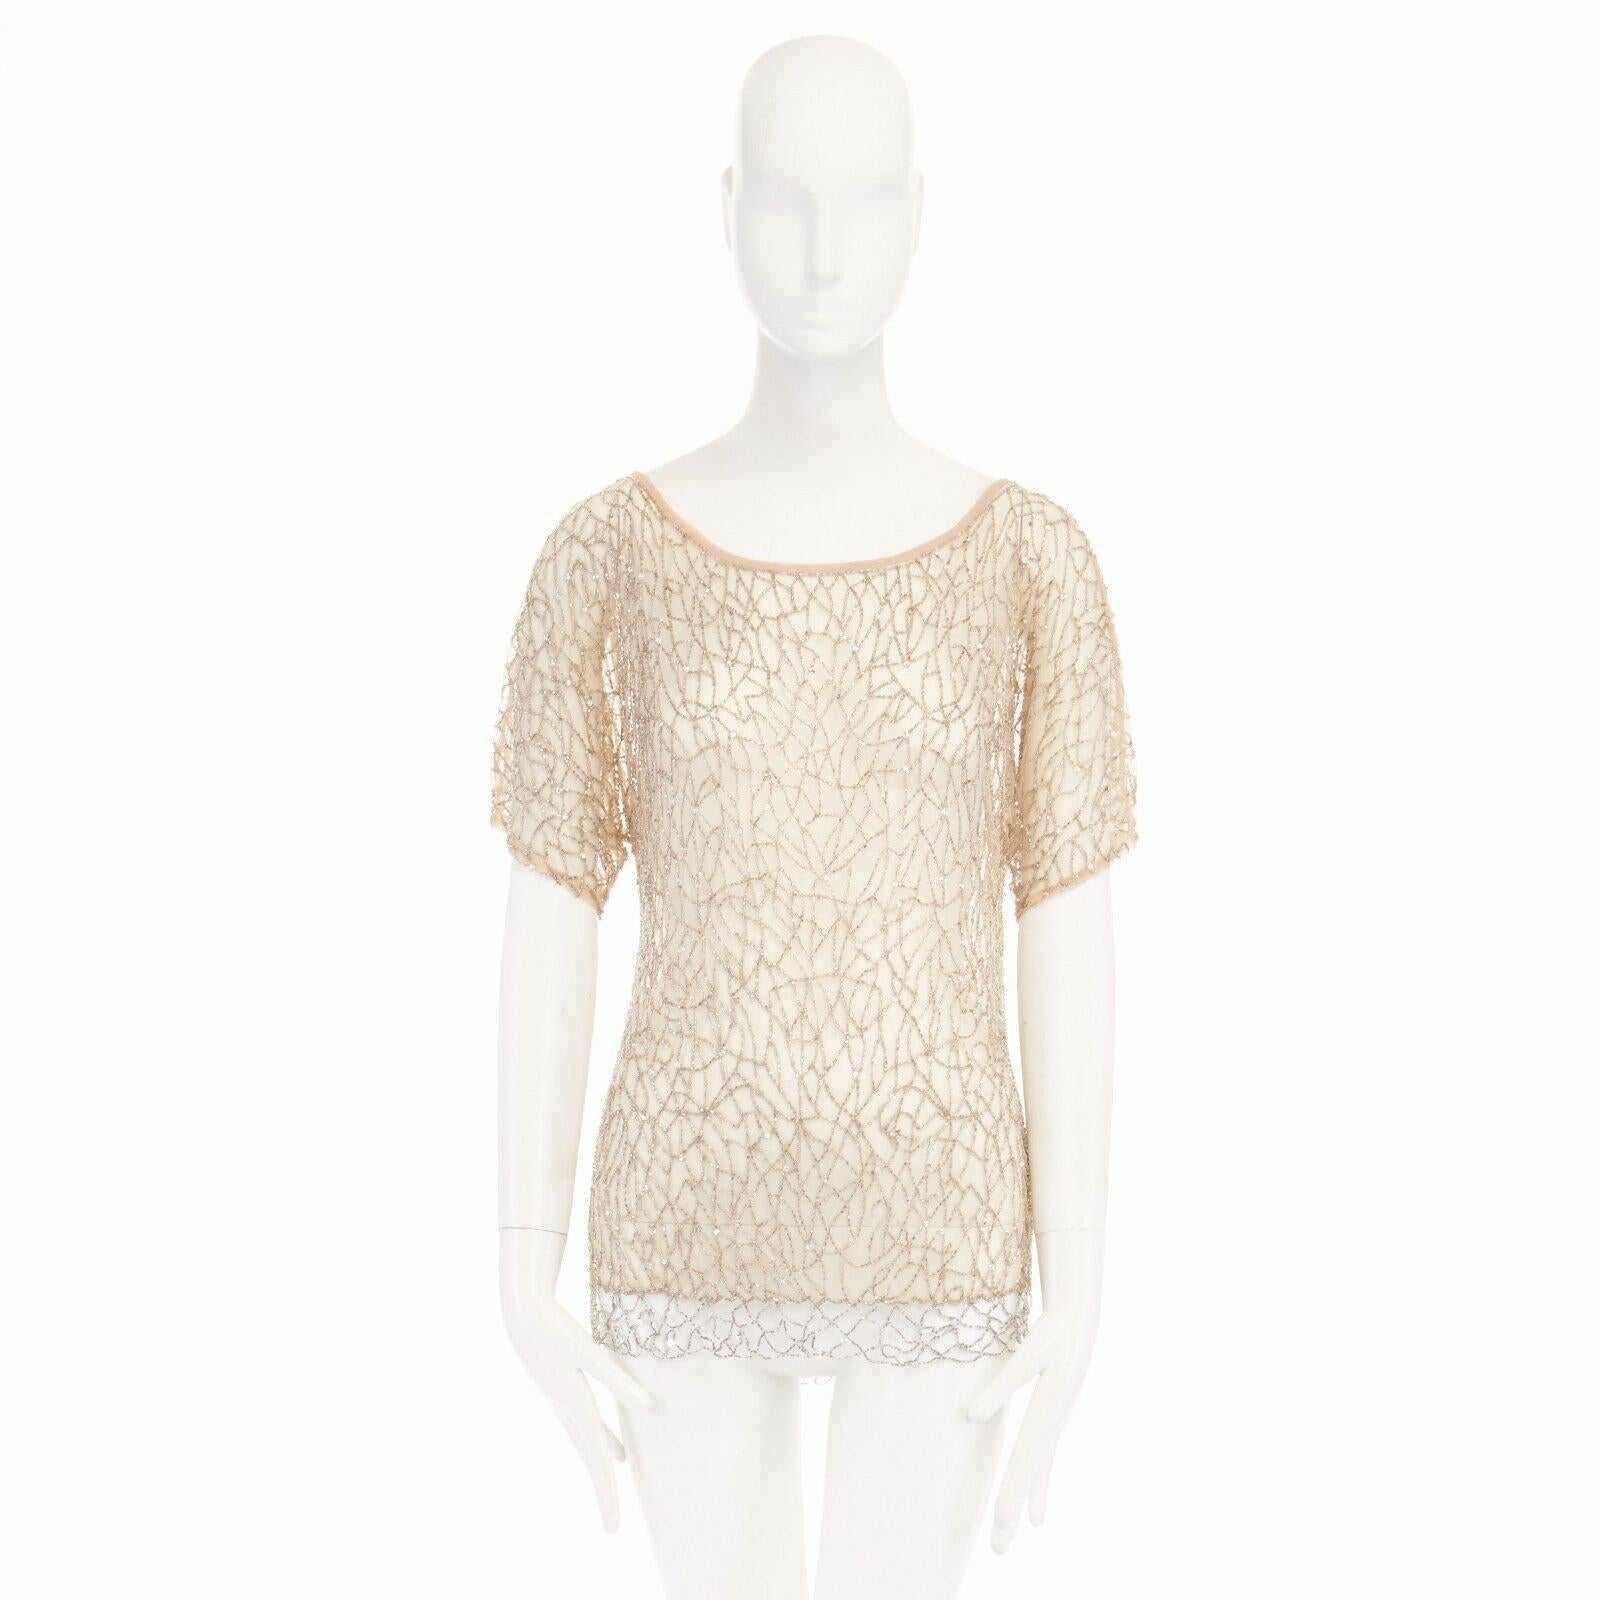 new HAUTE HIPPIE nude mesh bead embroidered bohemian boho top S 
Reference: WEYN/A00152 
Brand: Haute Hippie 
Material: Nylon 
Color: Beige 
Pattern: Other 
Extra Detail: 100% nylon. Nude sheer mesh base. Fully embellished in clear beads. Scooped